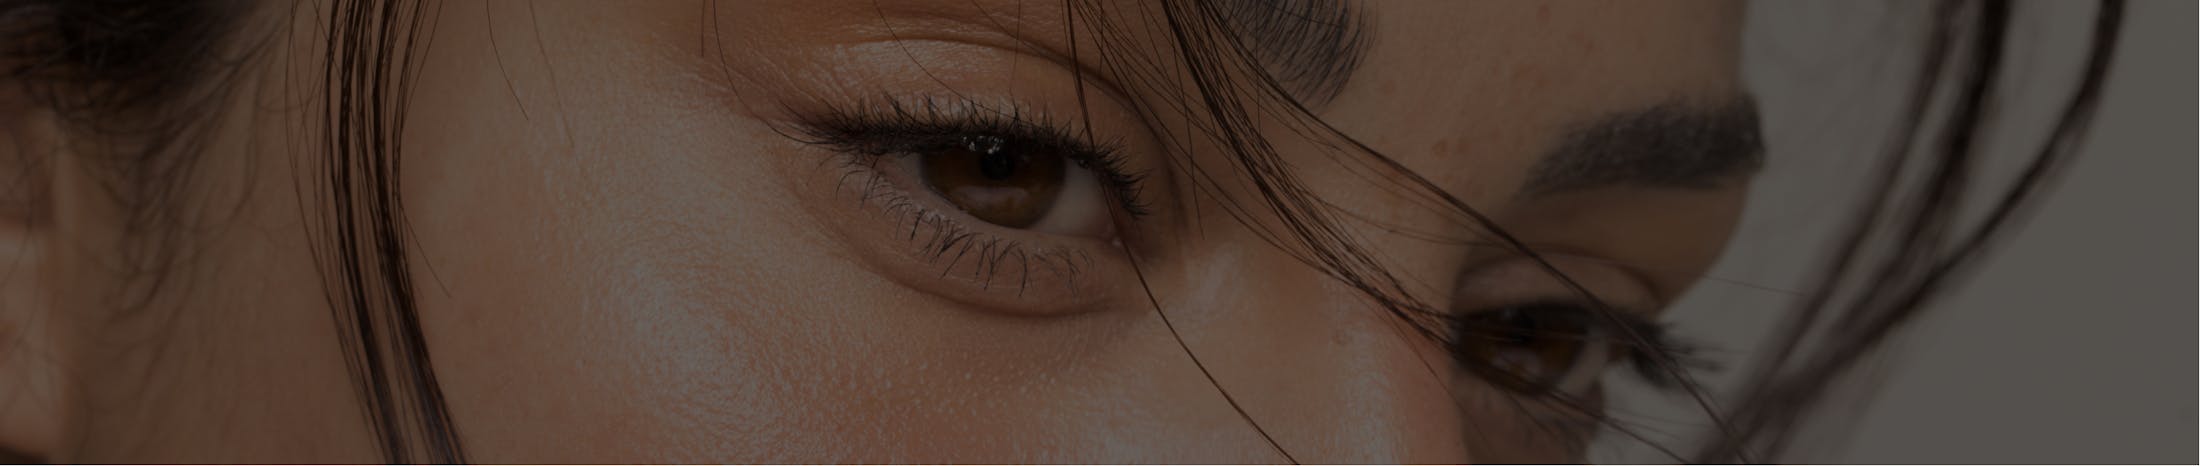 Close up view of womans eyes